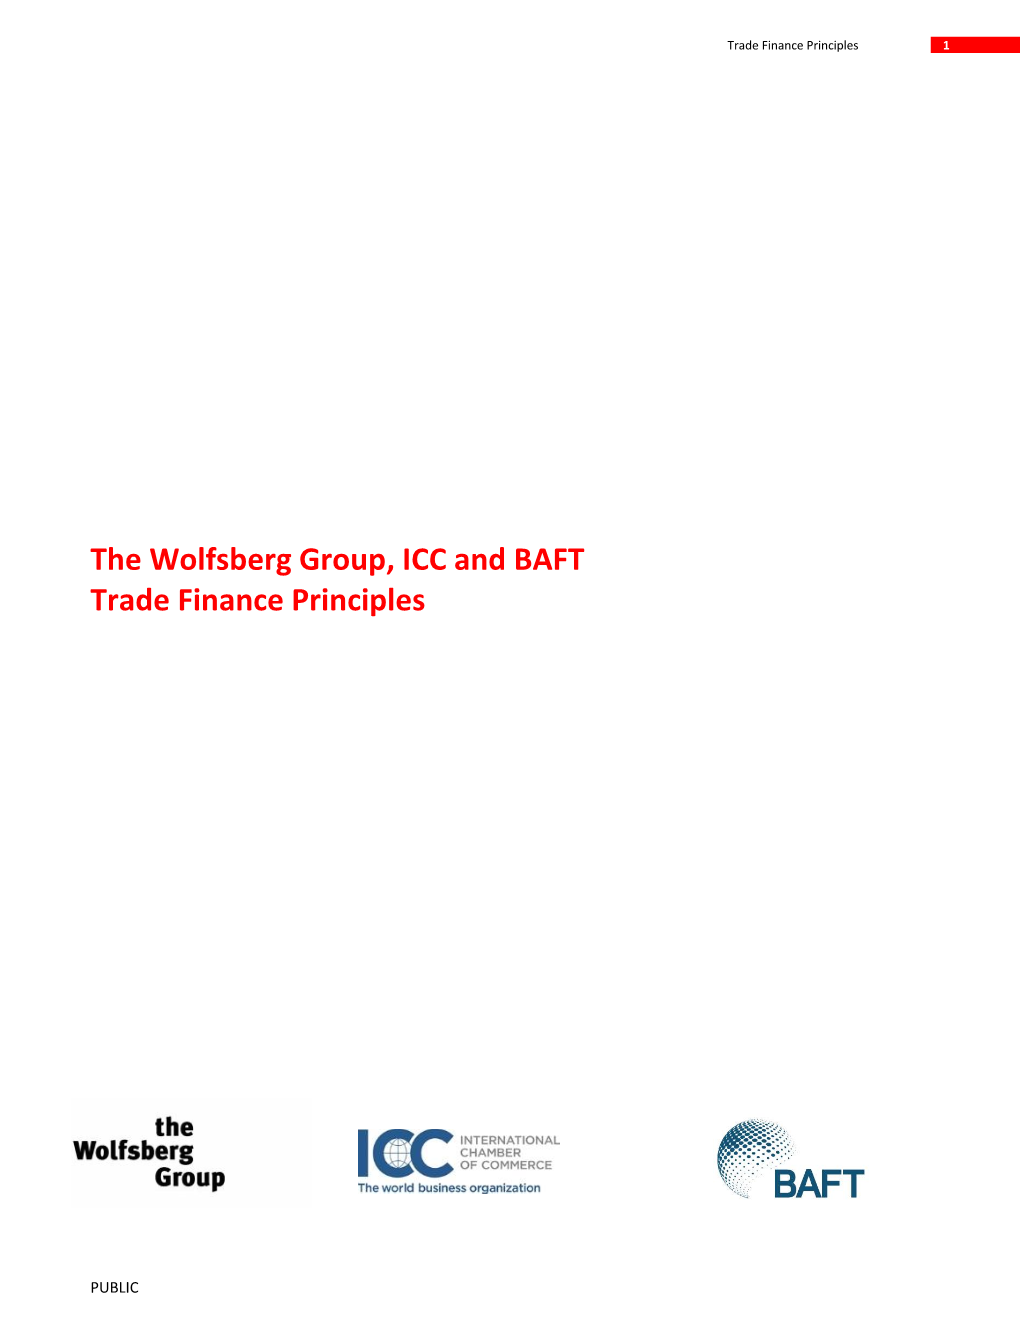 The Wolfsberg Group, ICC and BAFT Trade Finance Principles